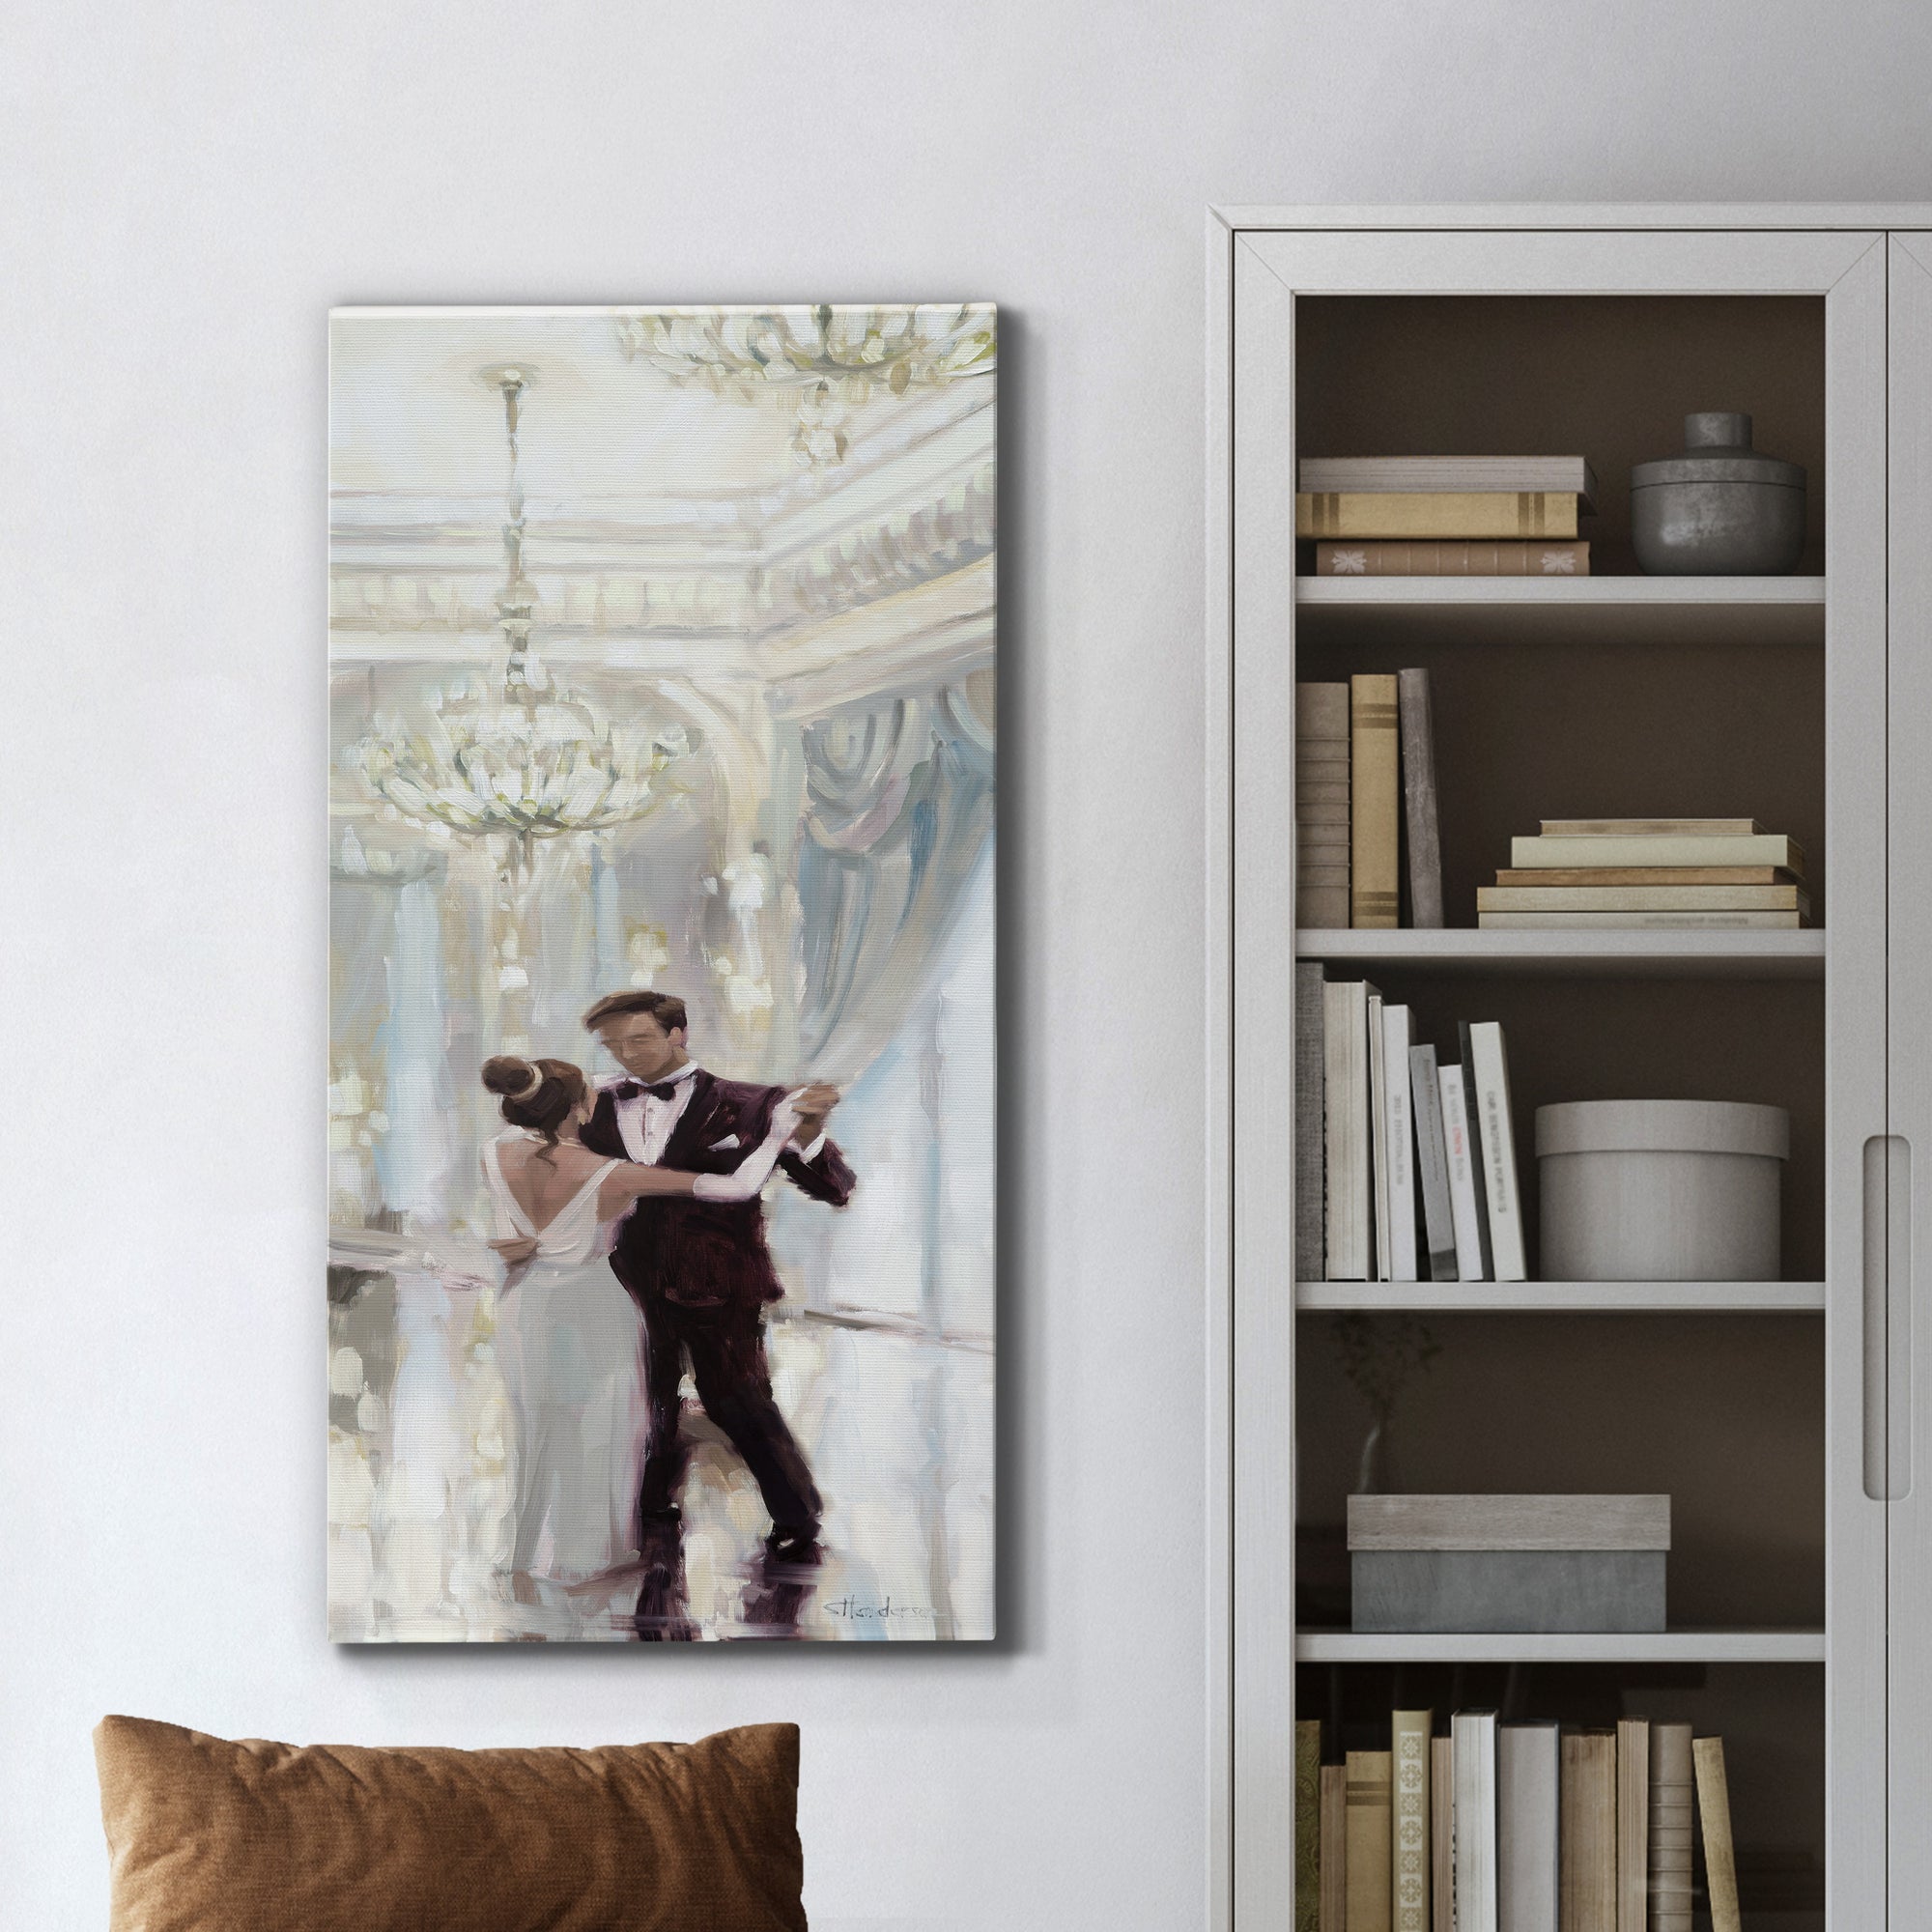 Ballroom Dancing - Premium Gallery Wrapped Canvas - Ready to Hang